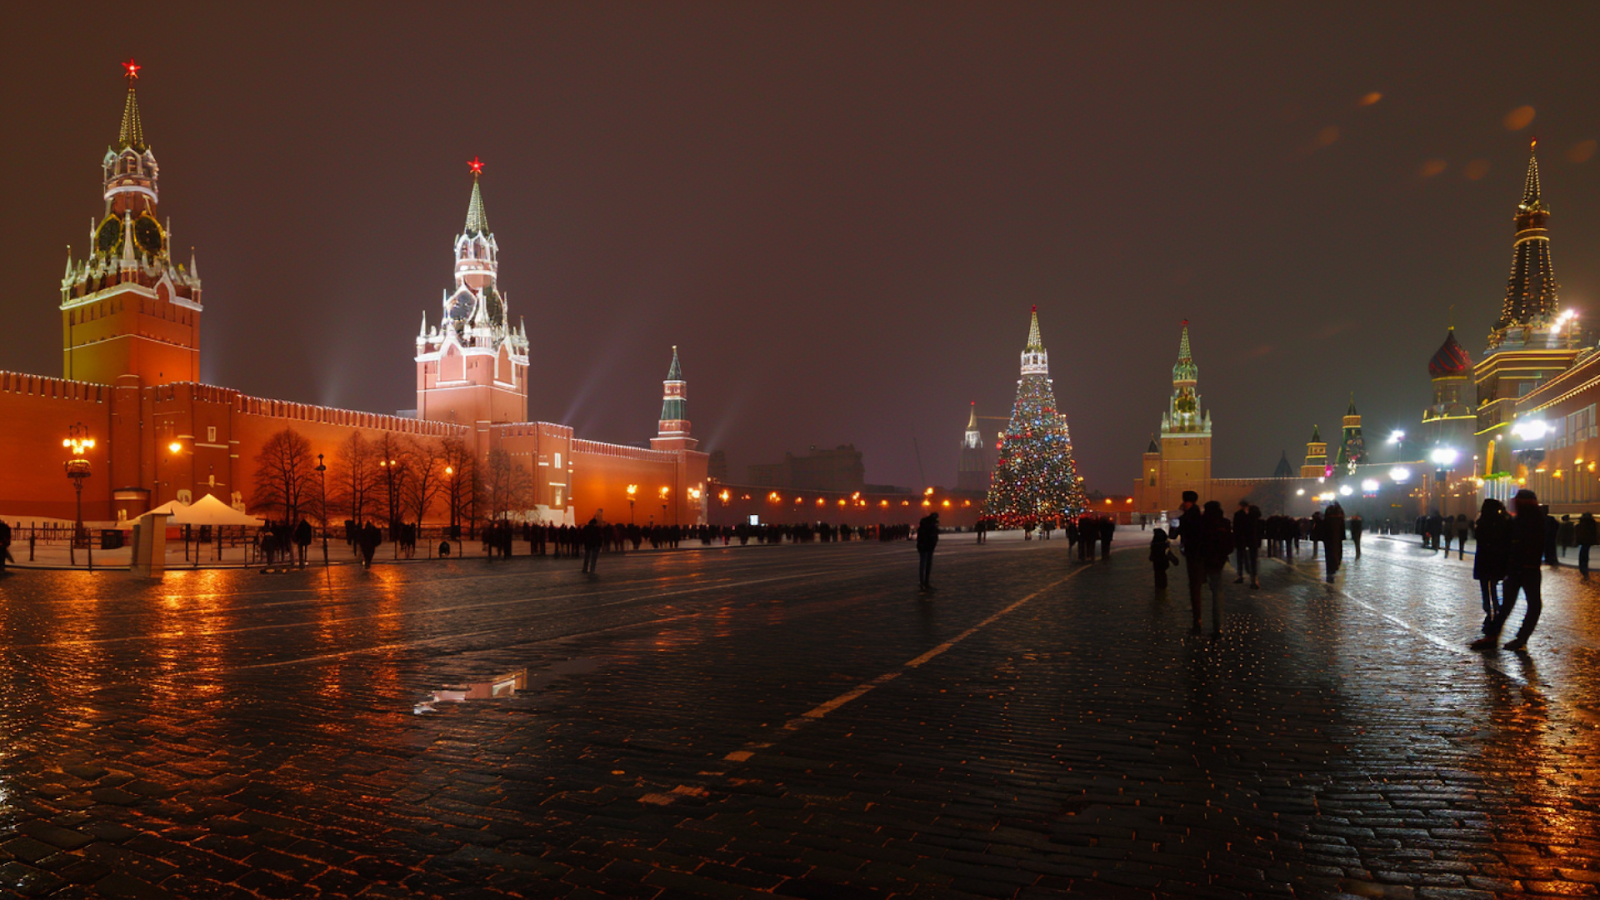 The Red Square in Moscow at night